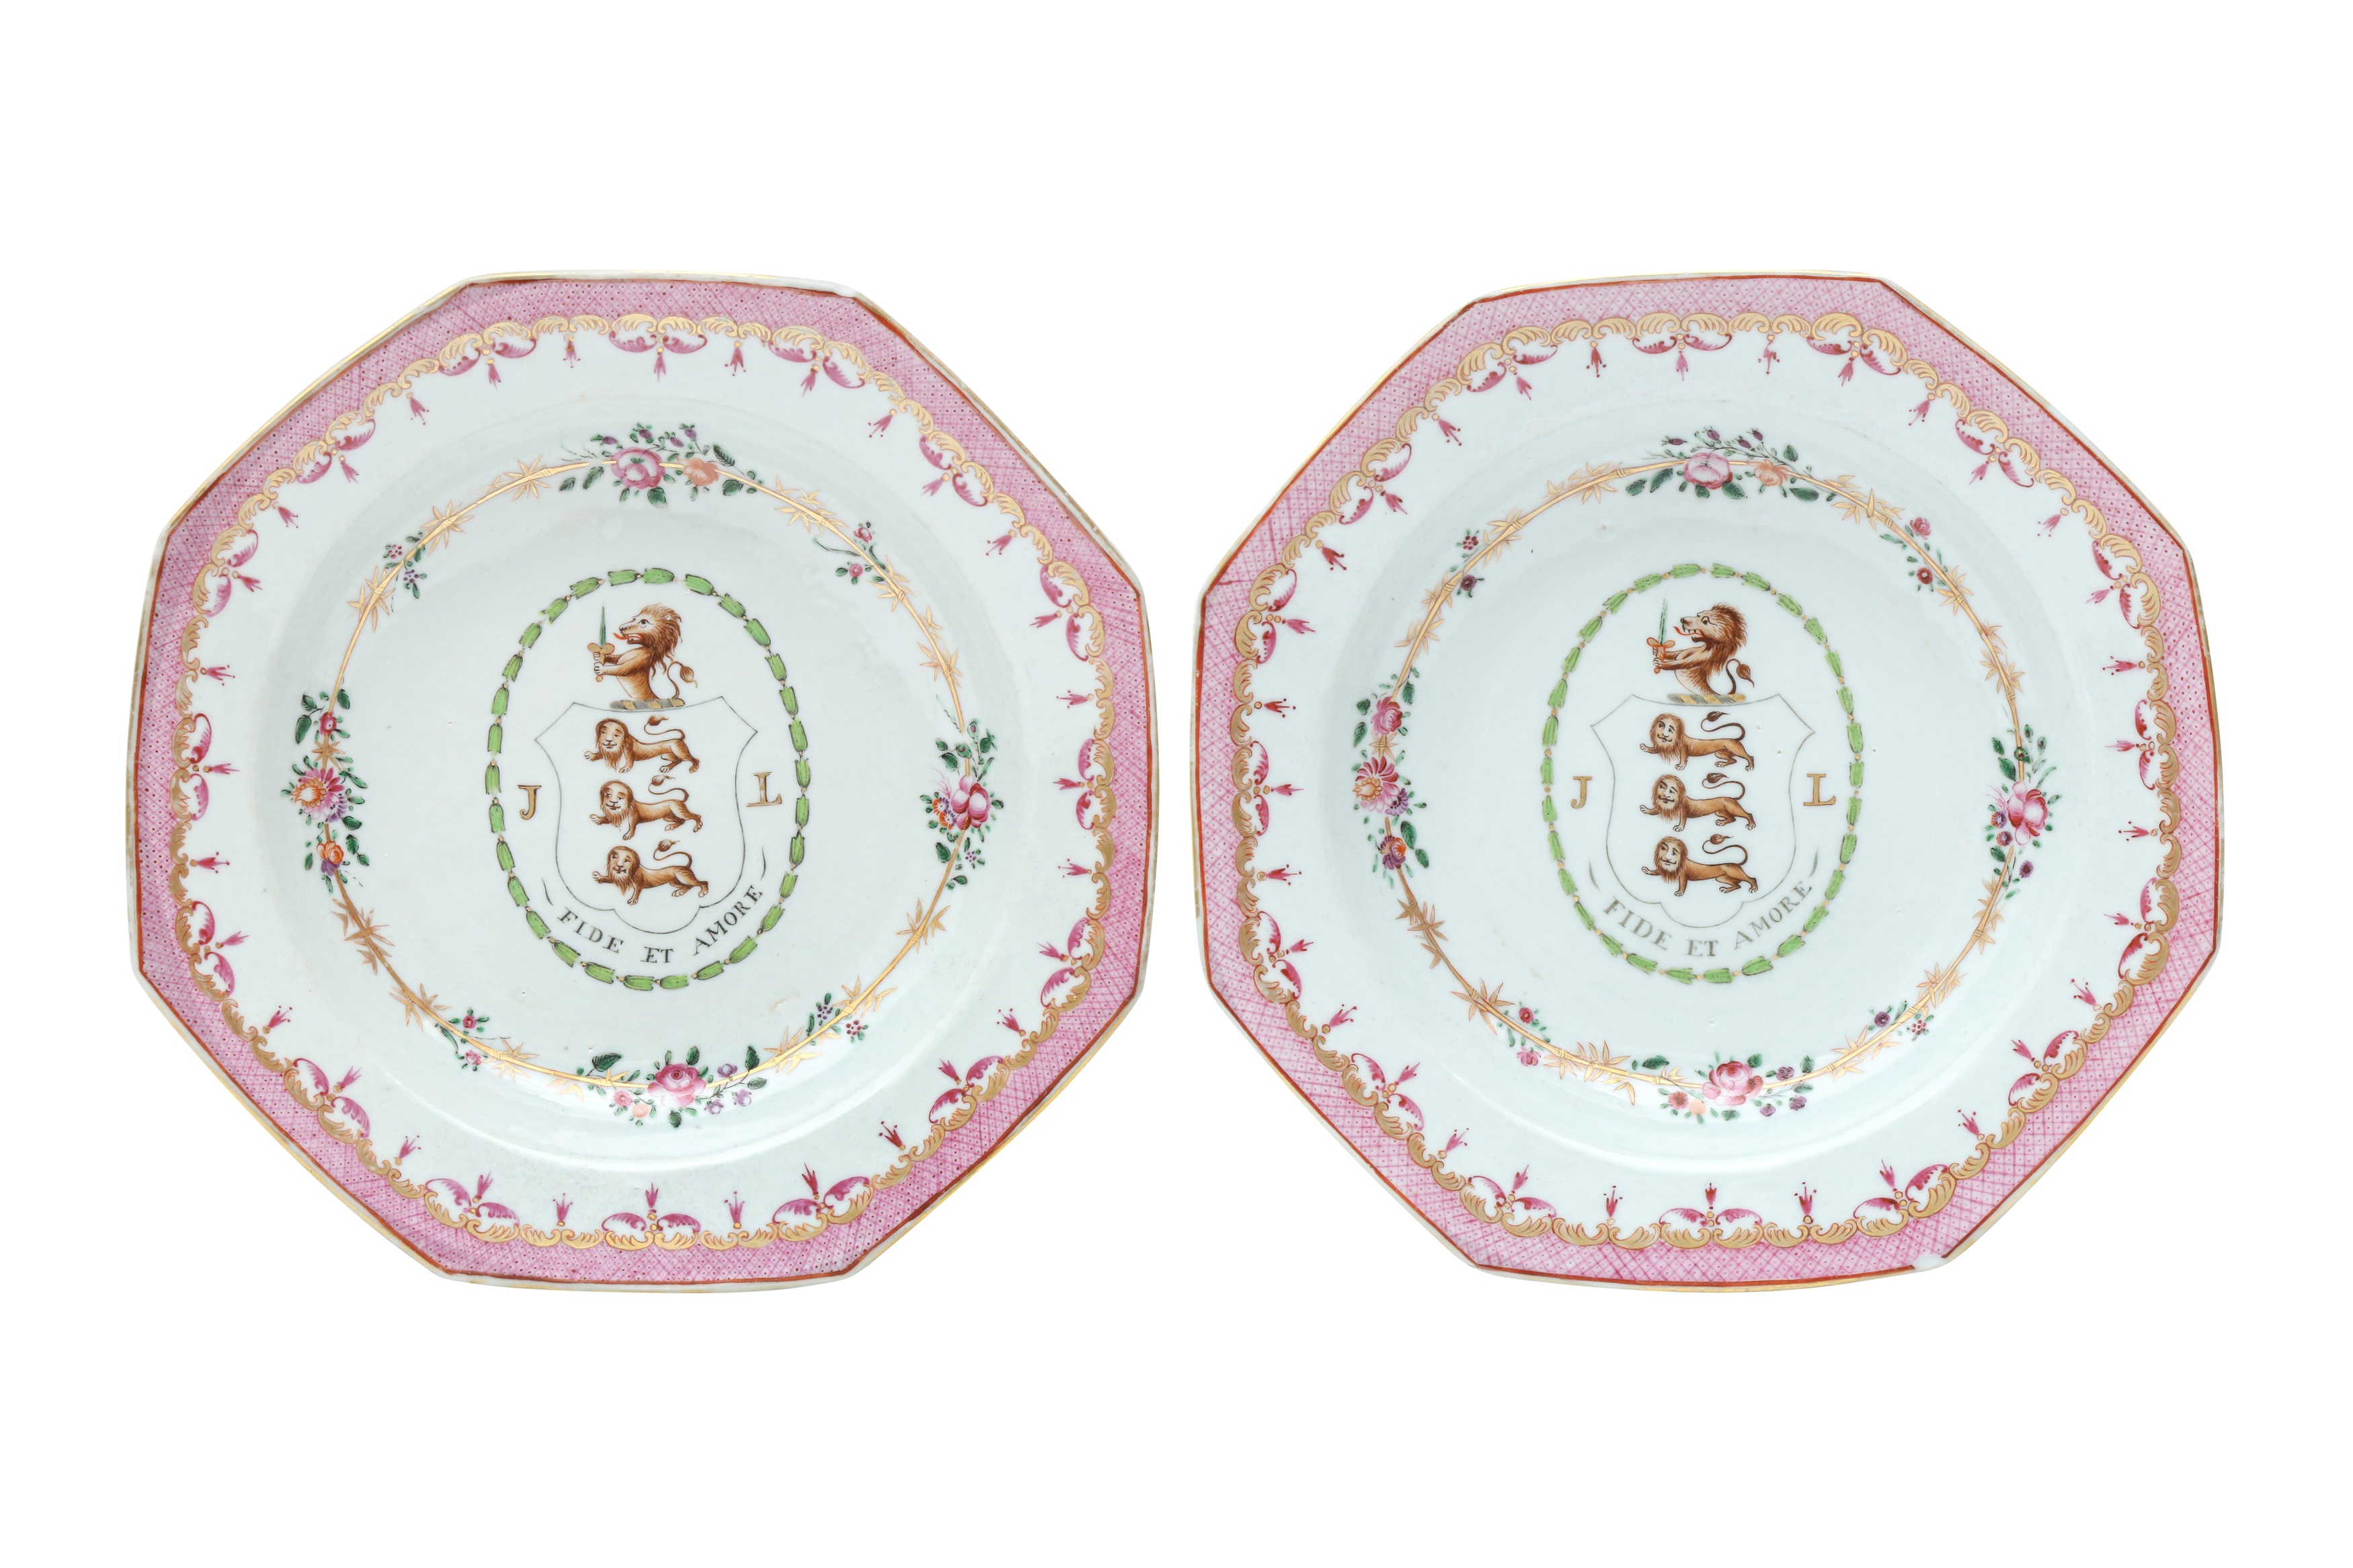 A PAIR OF CHINESE EXPORT FAMILLE ROSE ARMORIAL 'LUDLOW OF SHROPSHIRE' OCTAGONAL PORCELAIN DISHES 清乾隆